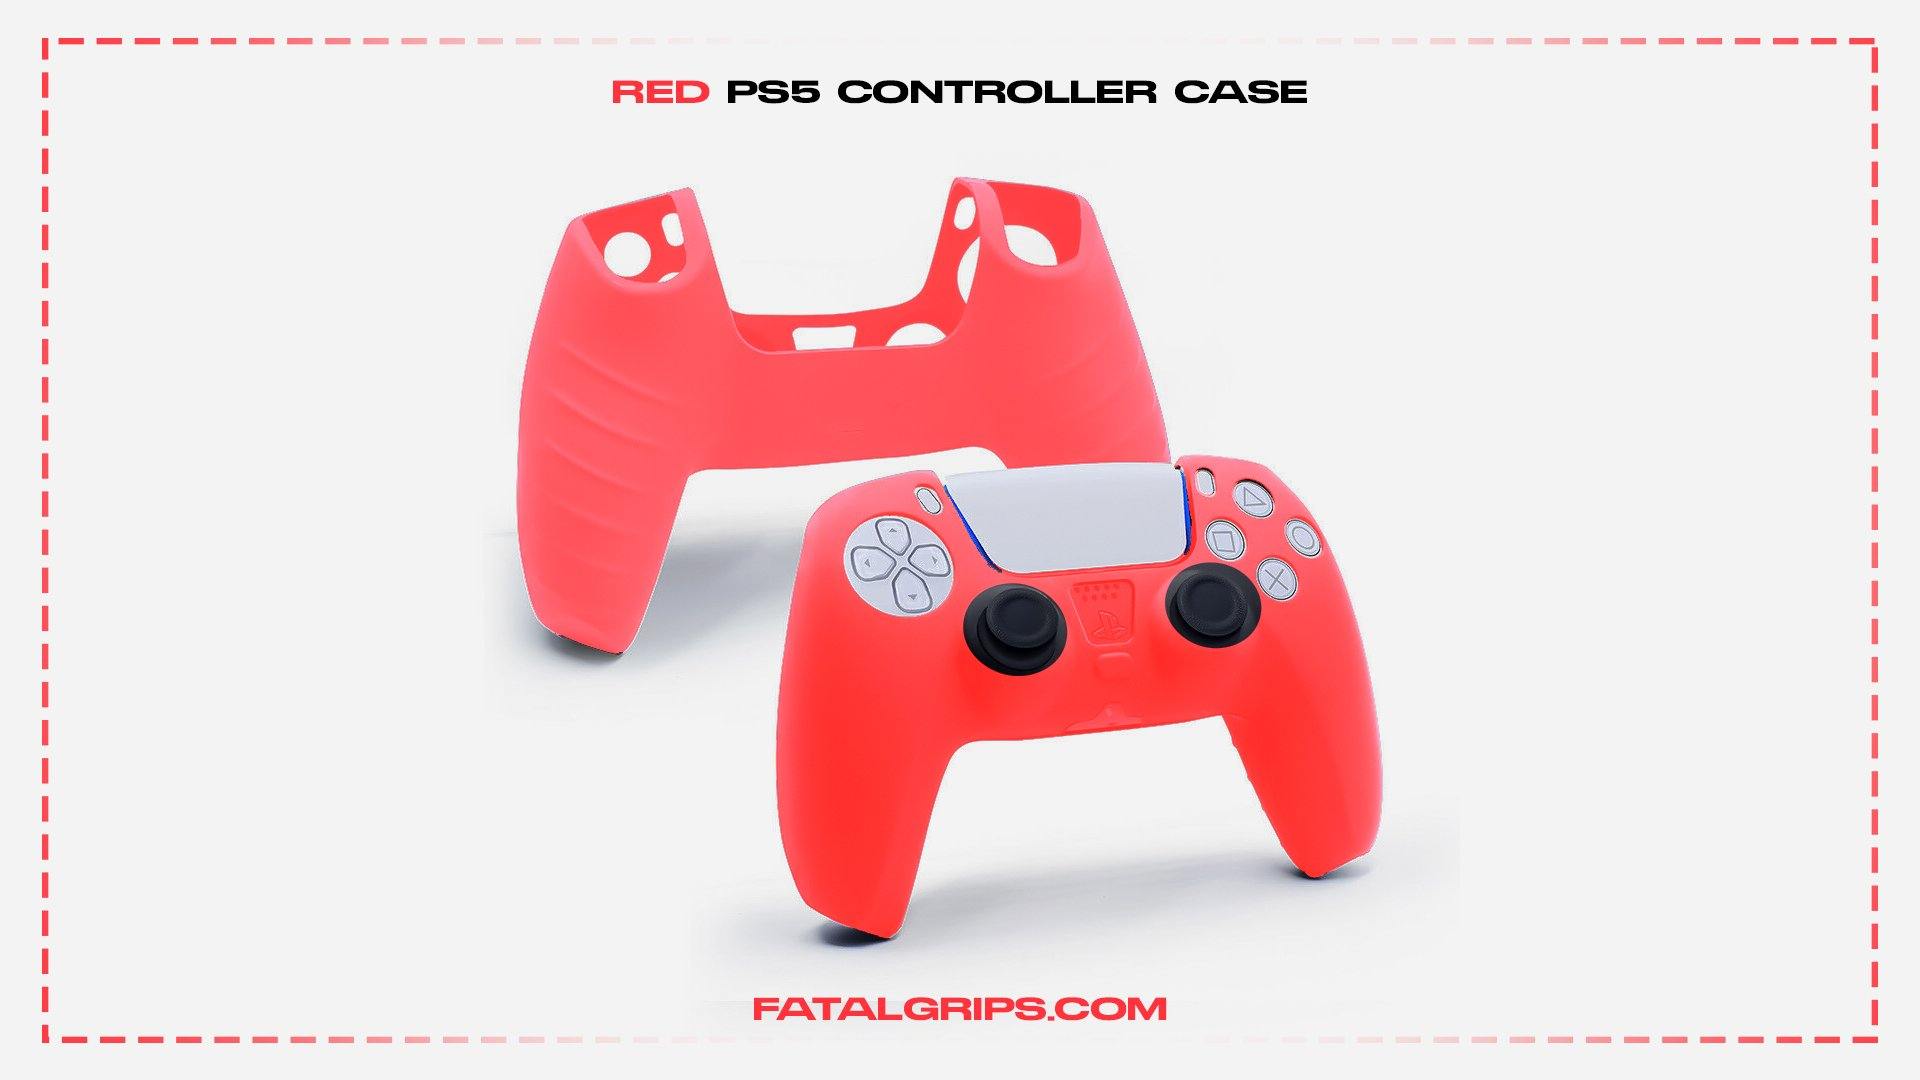 Red PS5 Controller Case - Fatal Grips